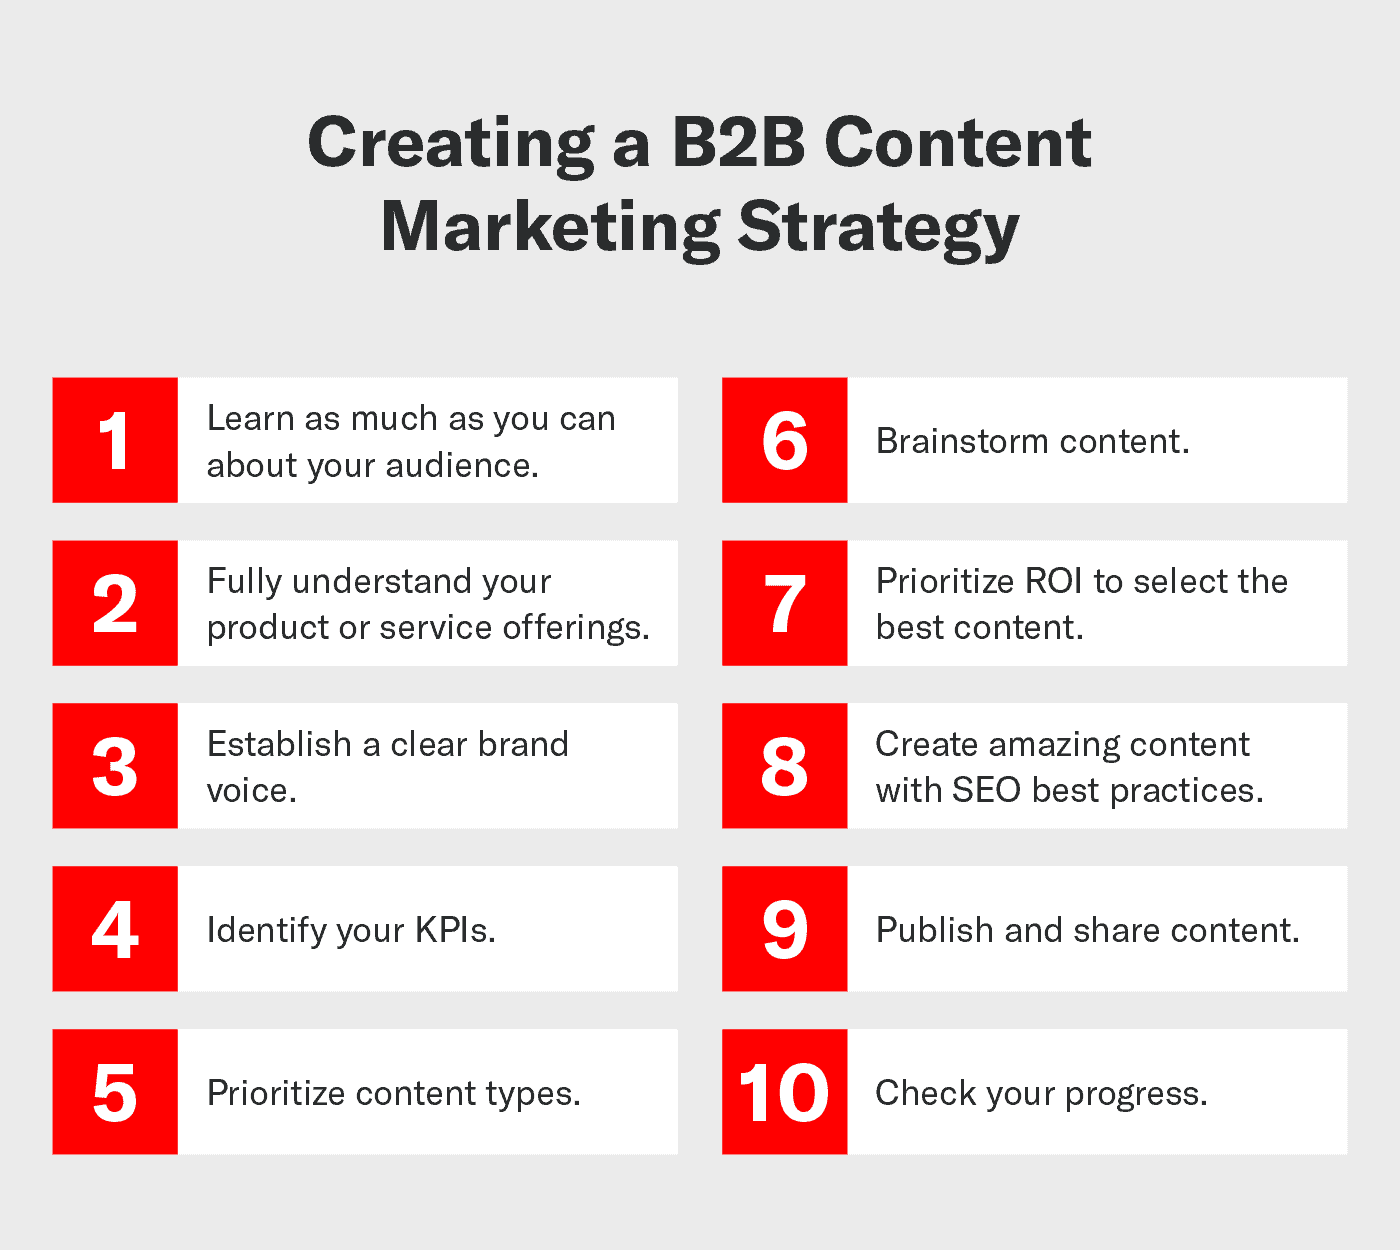 Key steps in creating a B2B content marketing strategy